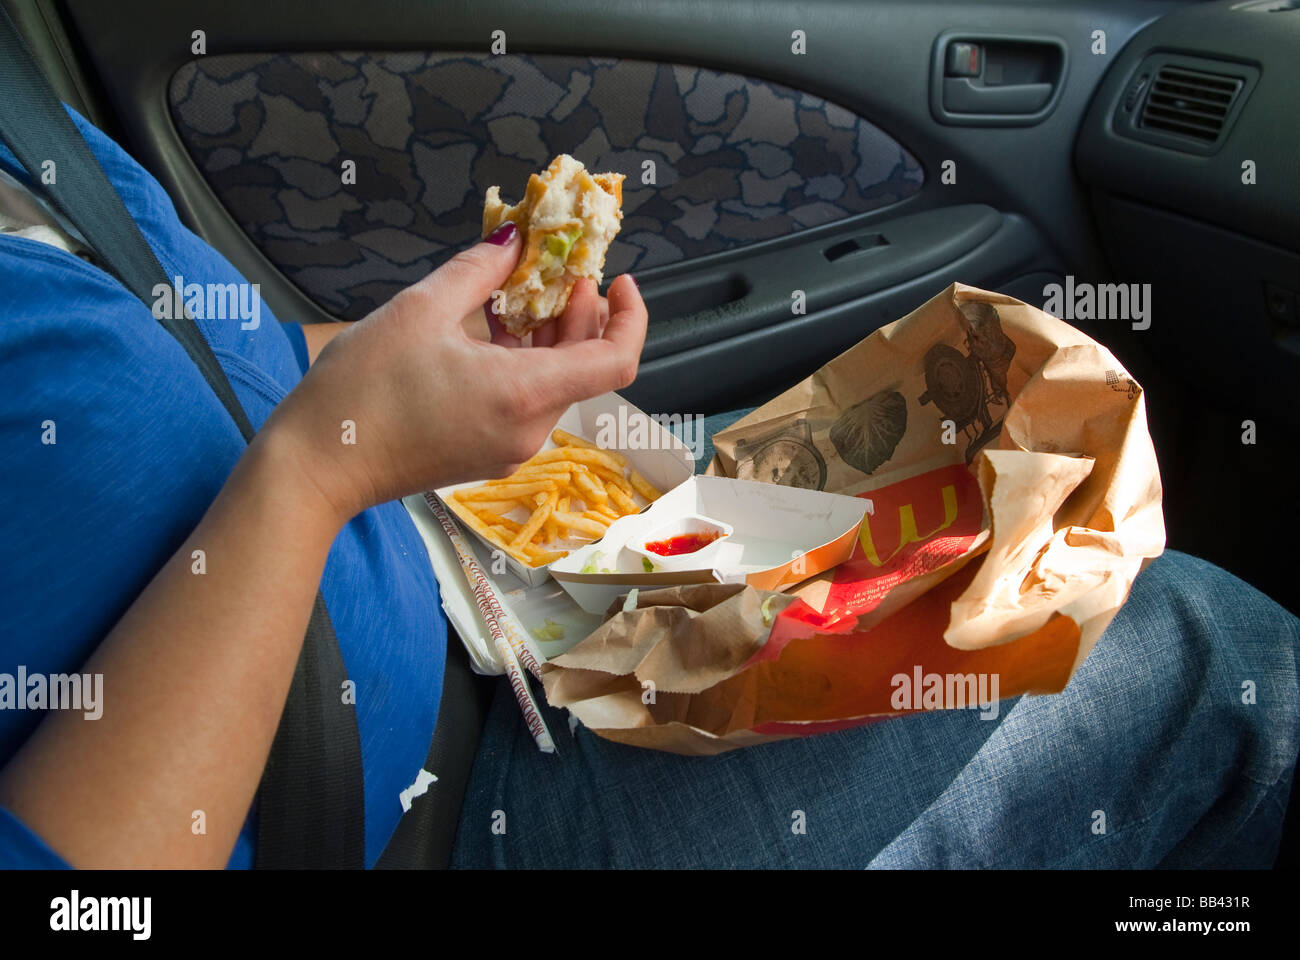 A woman eating a mcdonalds (fast food) inside a car with a chicken burger,fries and tomato ketchup in the uk Stock Photo